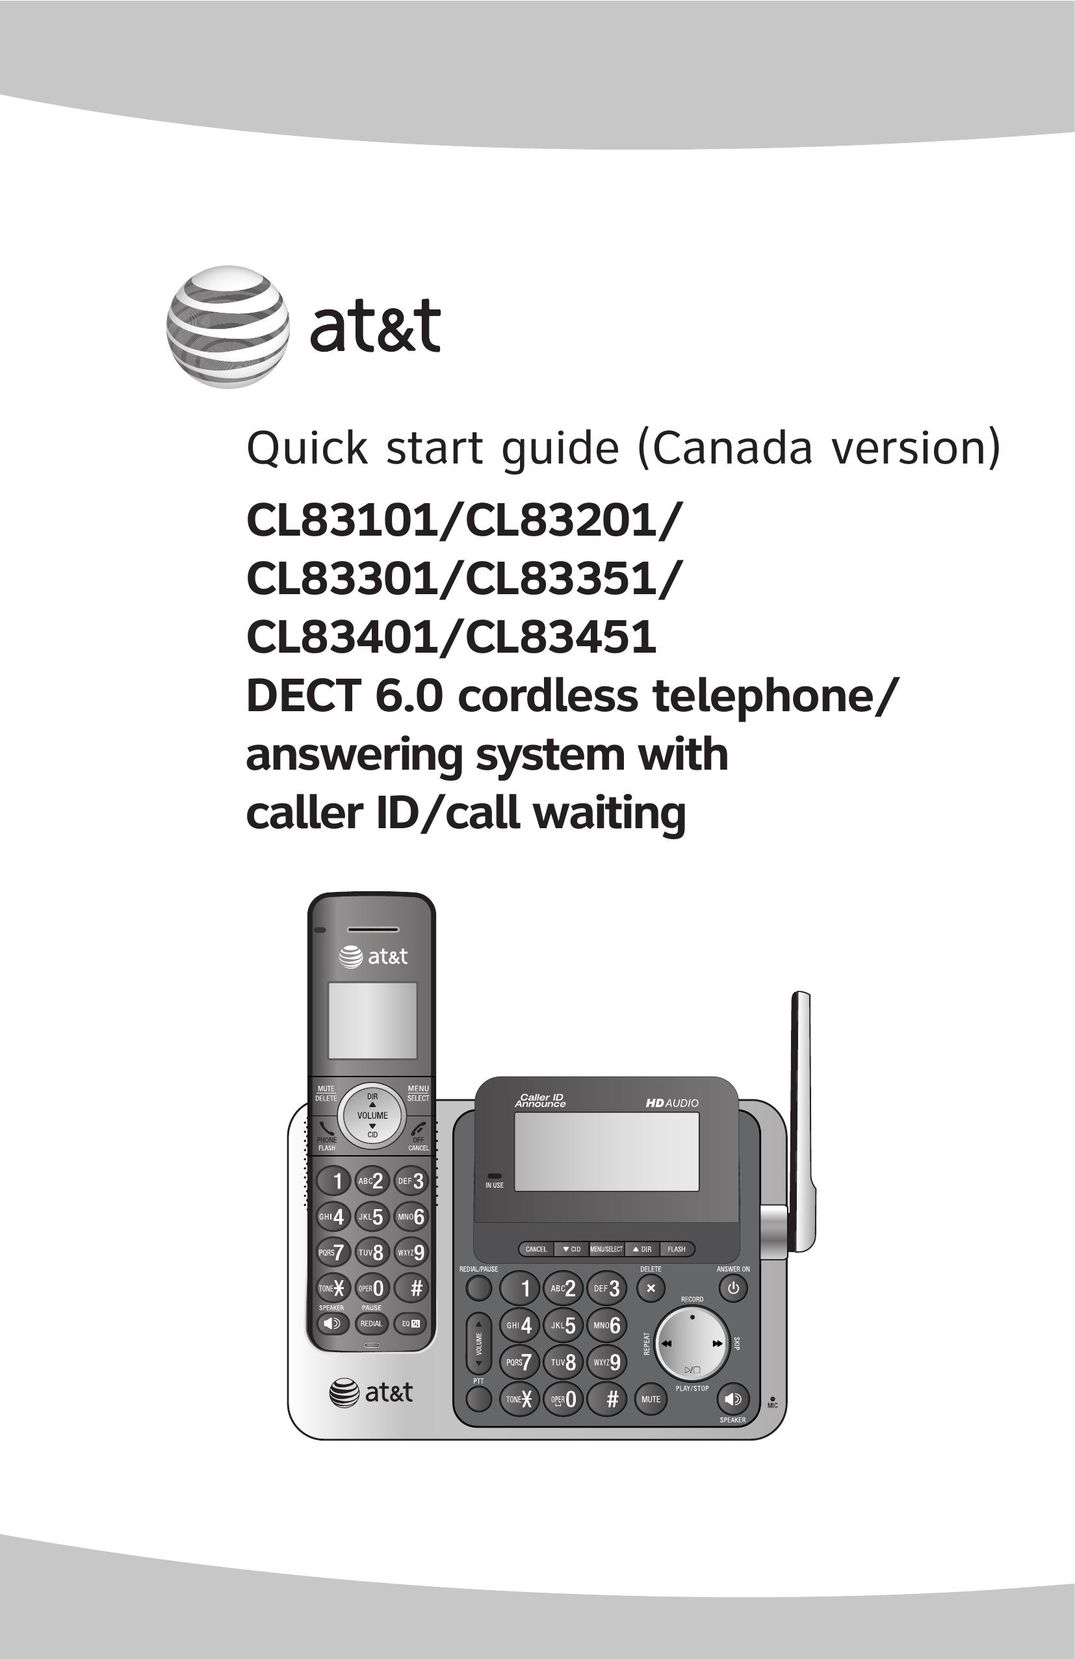 A & T International CL83201 Cordless Telephone User Manual